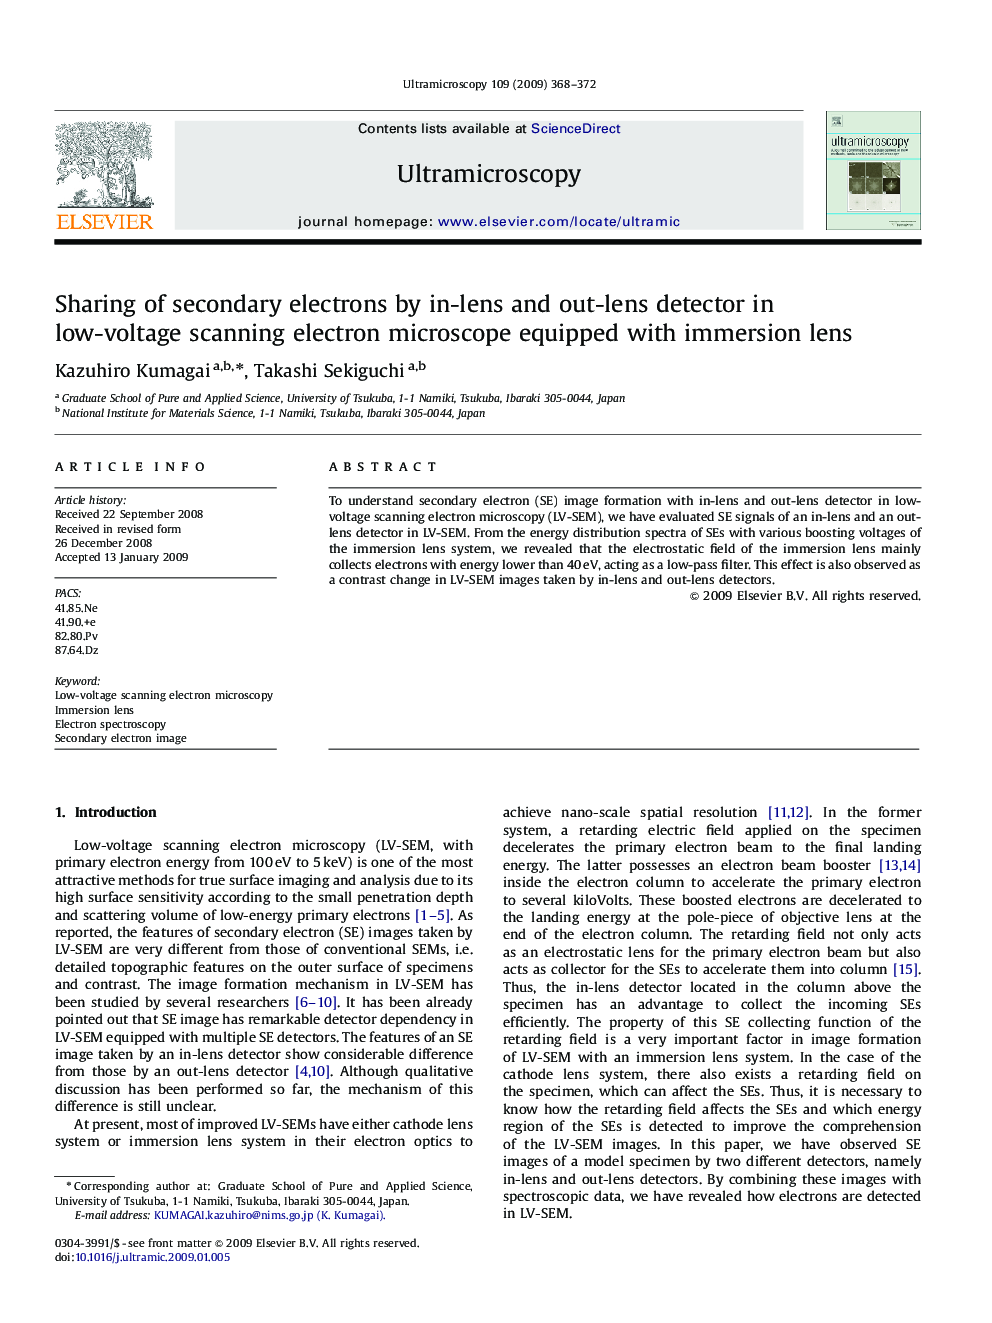 Sharing of secondary electrons by in-lens and out-lens detector in low-voltage scanning electron microscope equipped with immersion lens